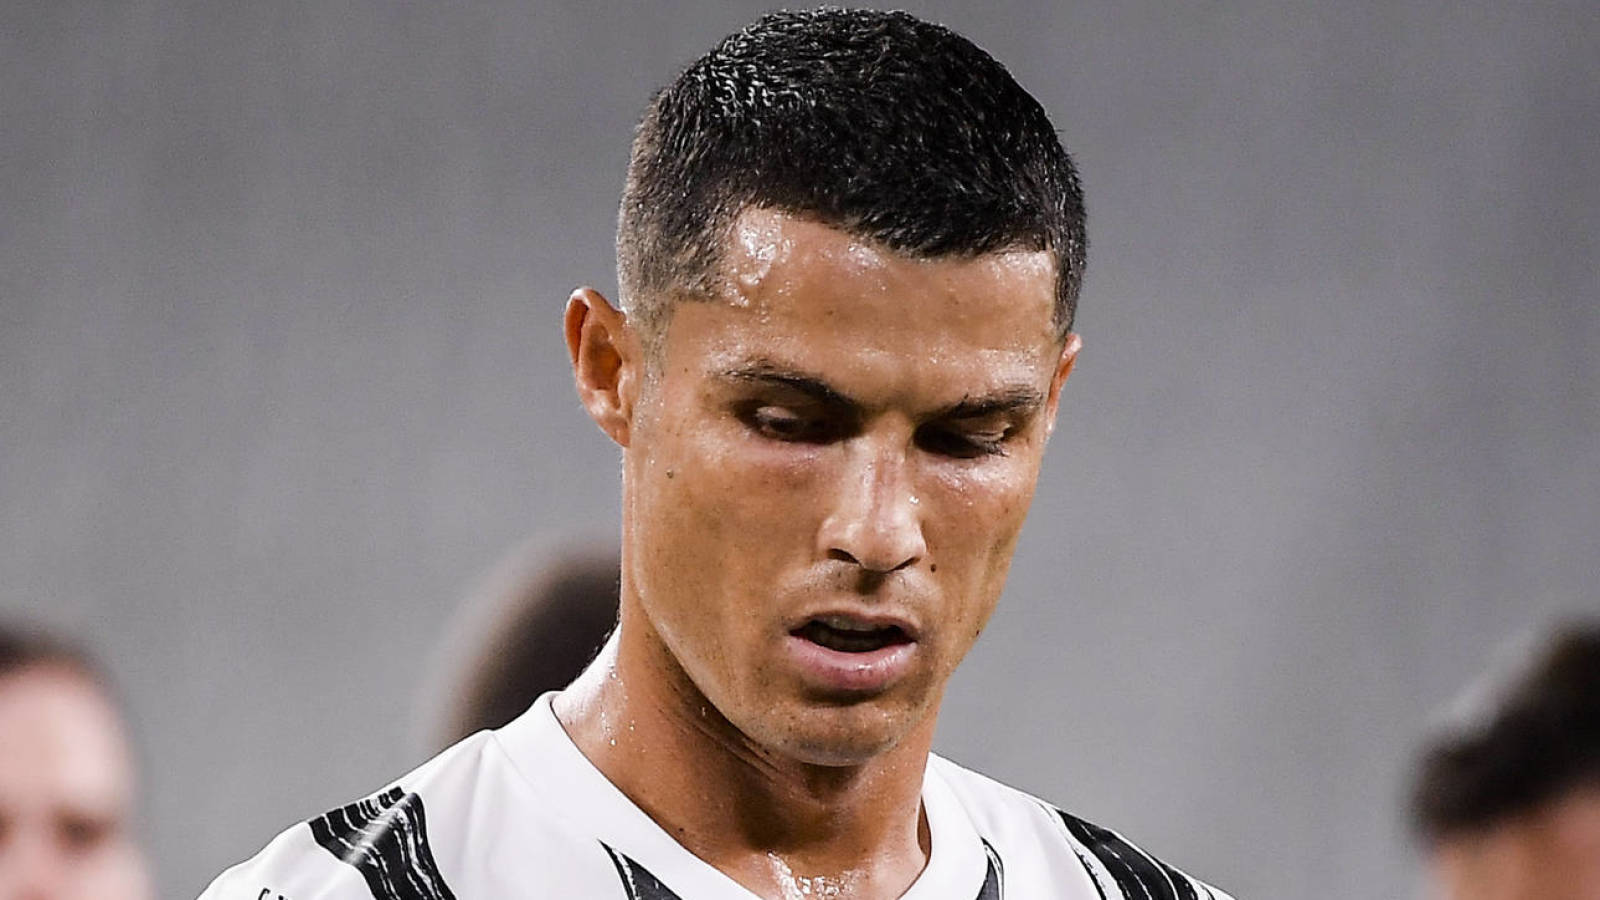 How to get this Cristiano Ronaldo hair? : r/malegrooming